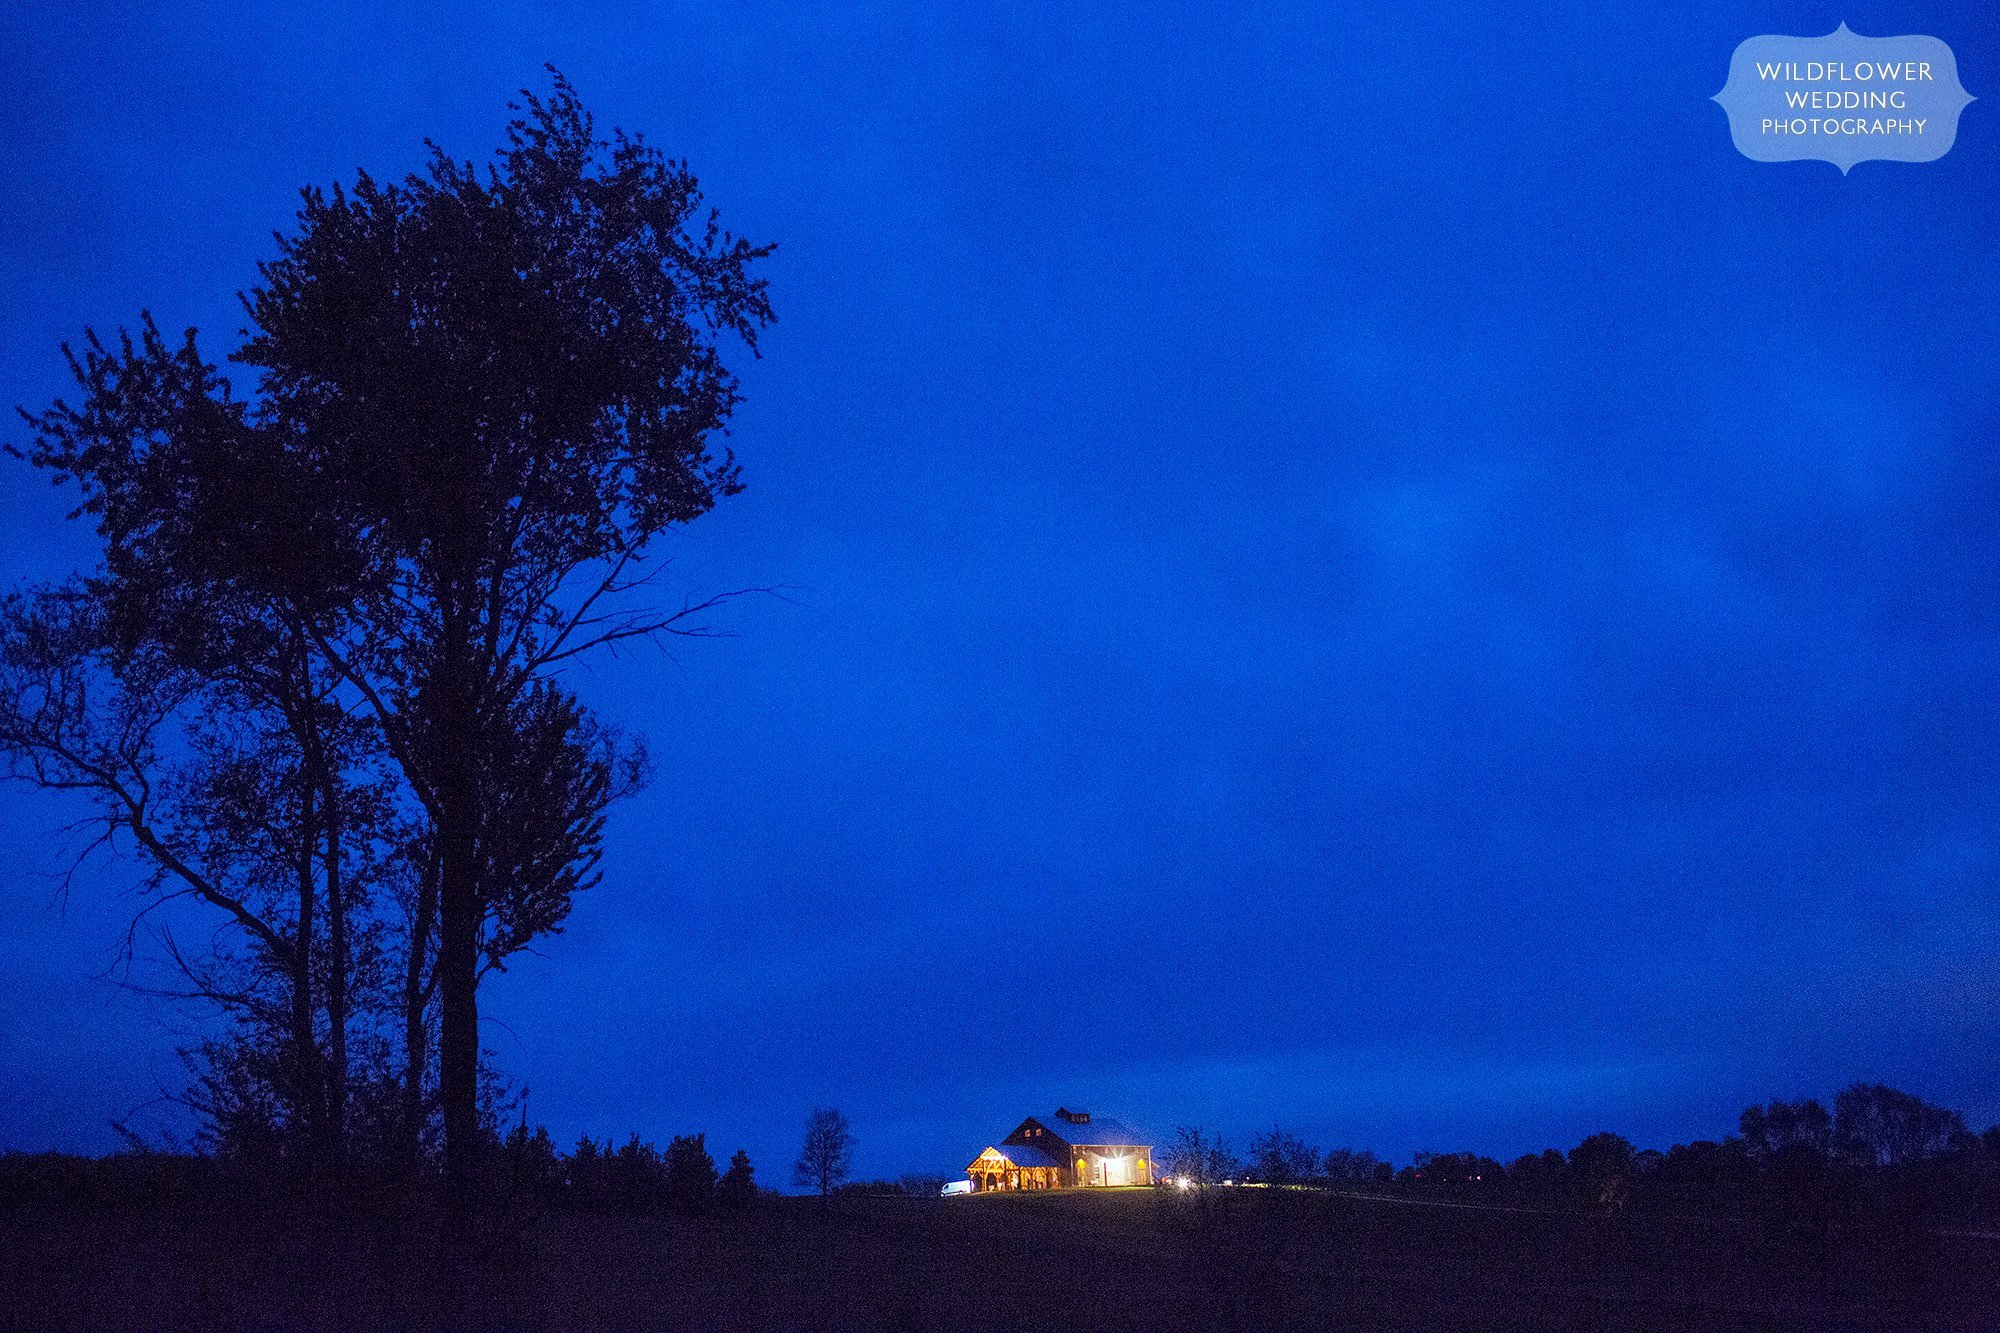 Twilight falls on the new timber barn at the Weston Red Barn Farm venue north of KC.